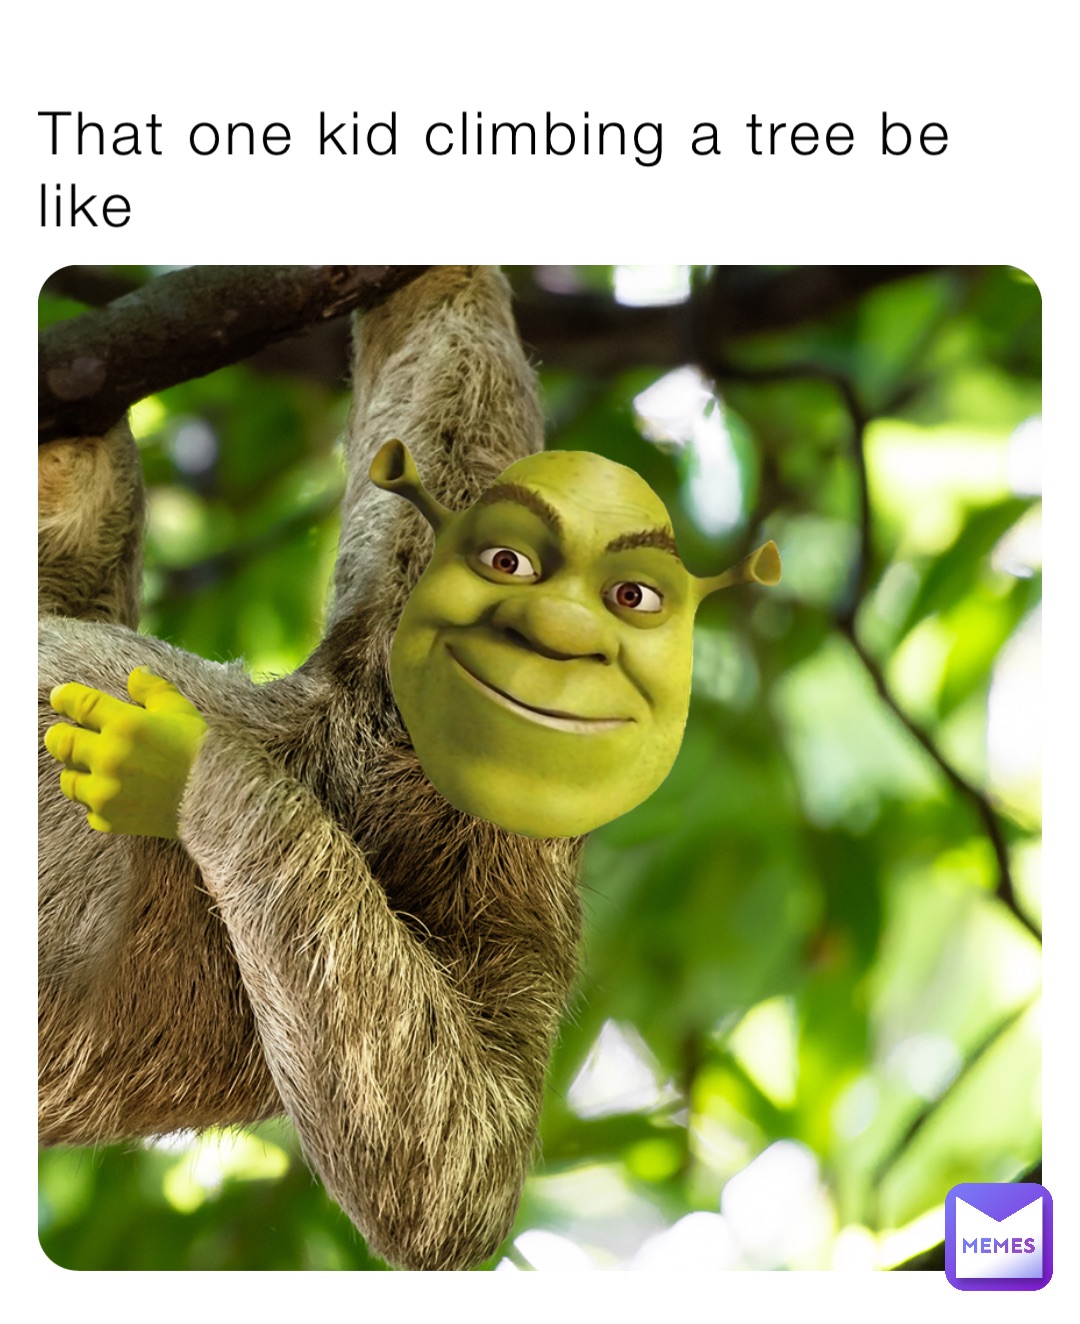 That one kid climbing a tree be like